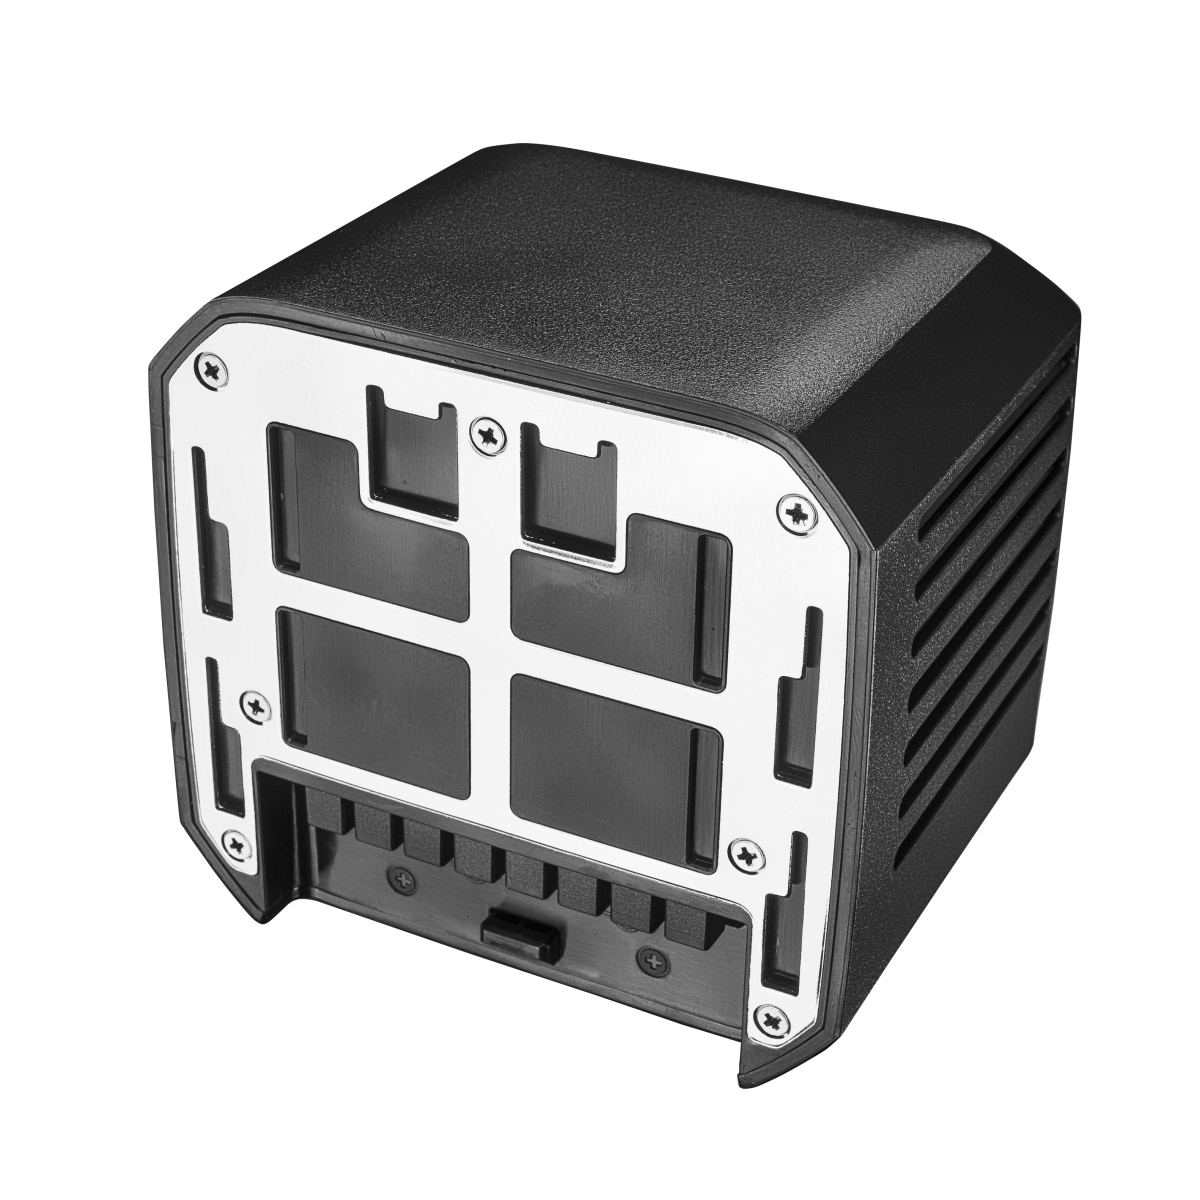 Walimex pro power source adapter for 2Go series